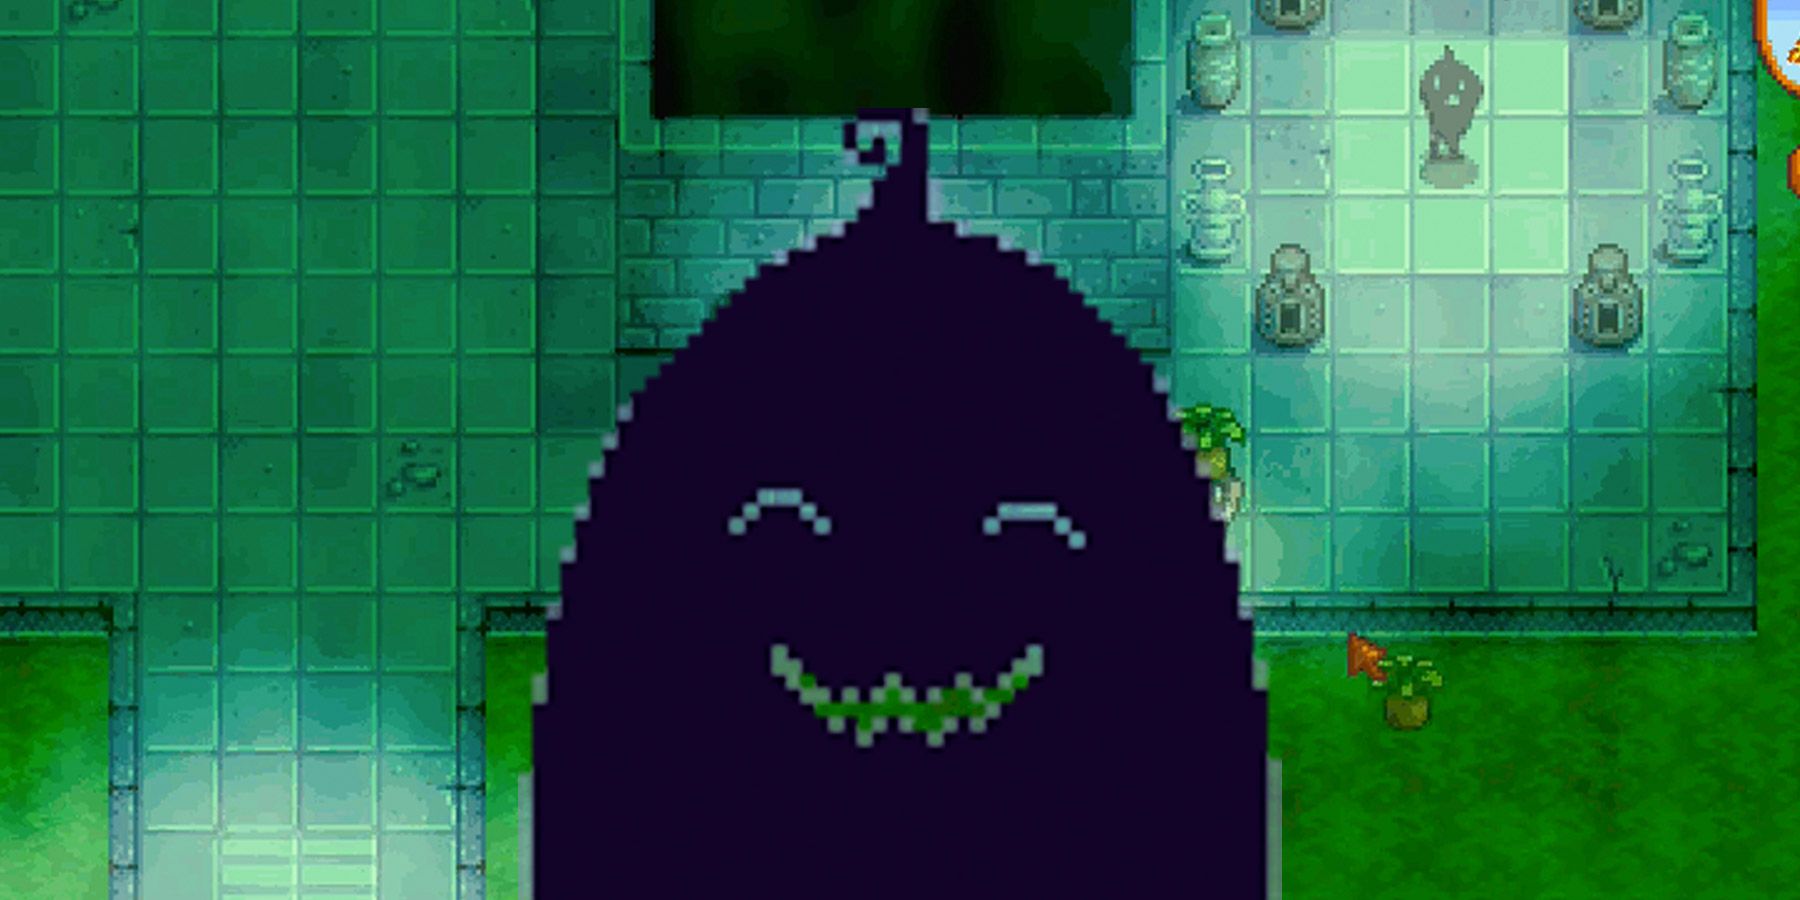 Pixel art - screenshot of video game stardew valley, a green sewer background with krobus, a round black smiling monster